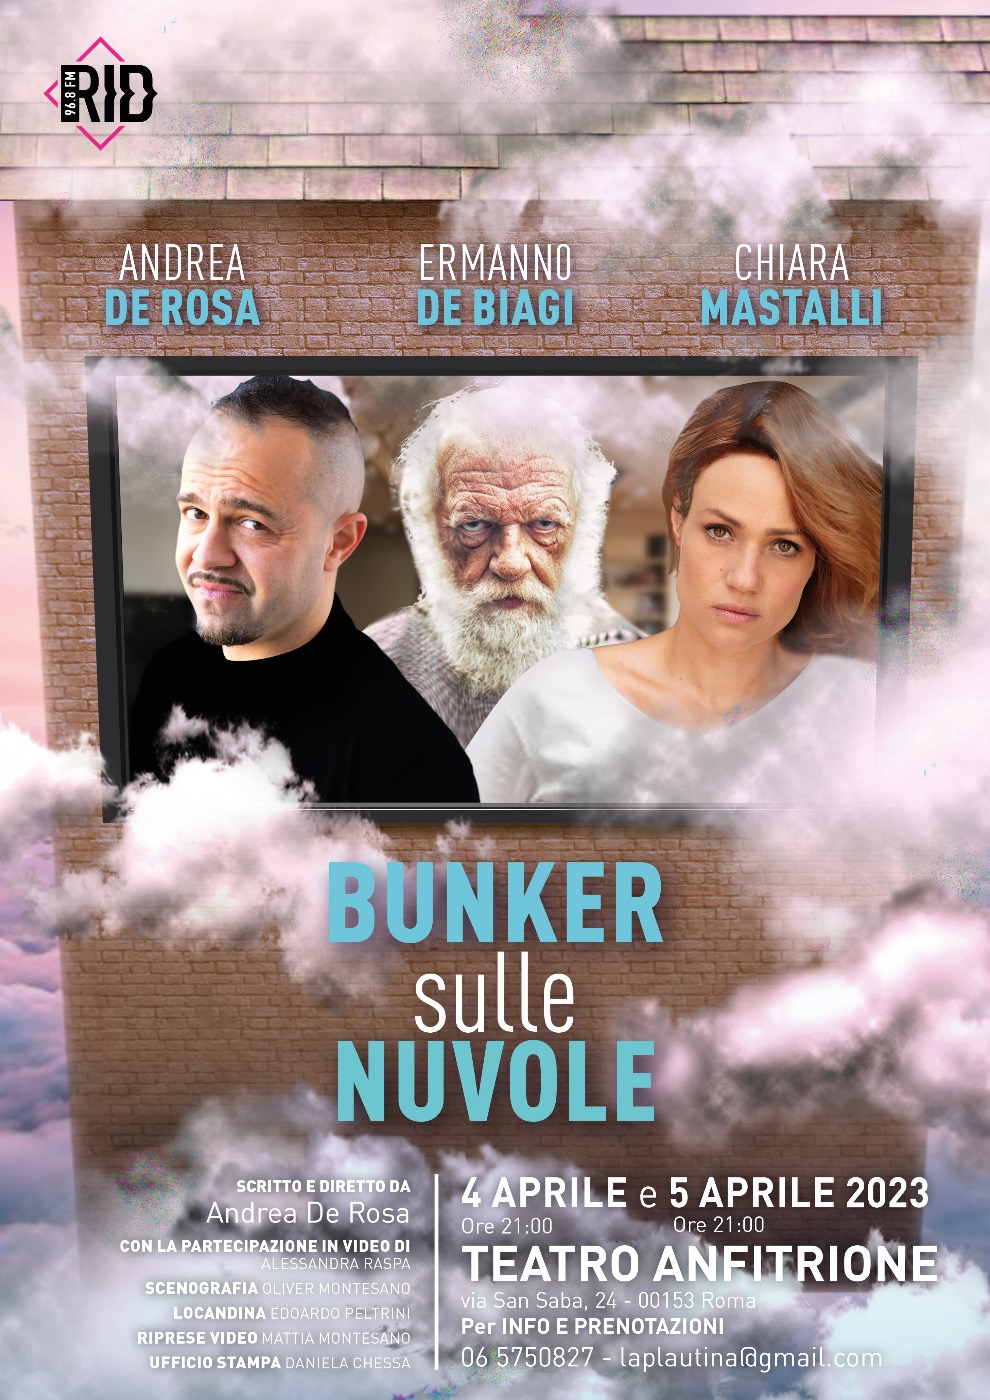 Bunker sulle Nuvole